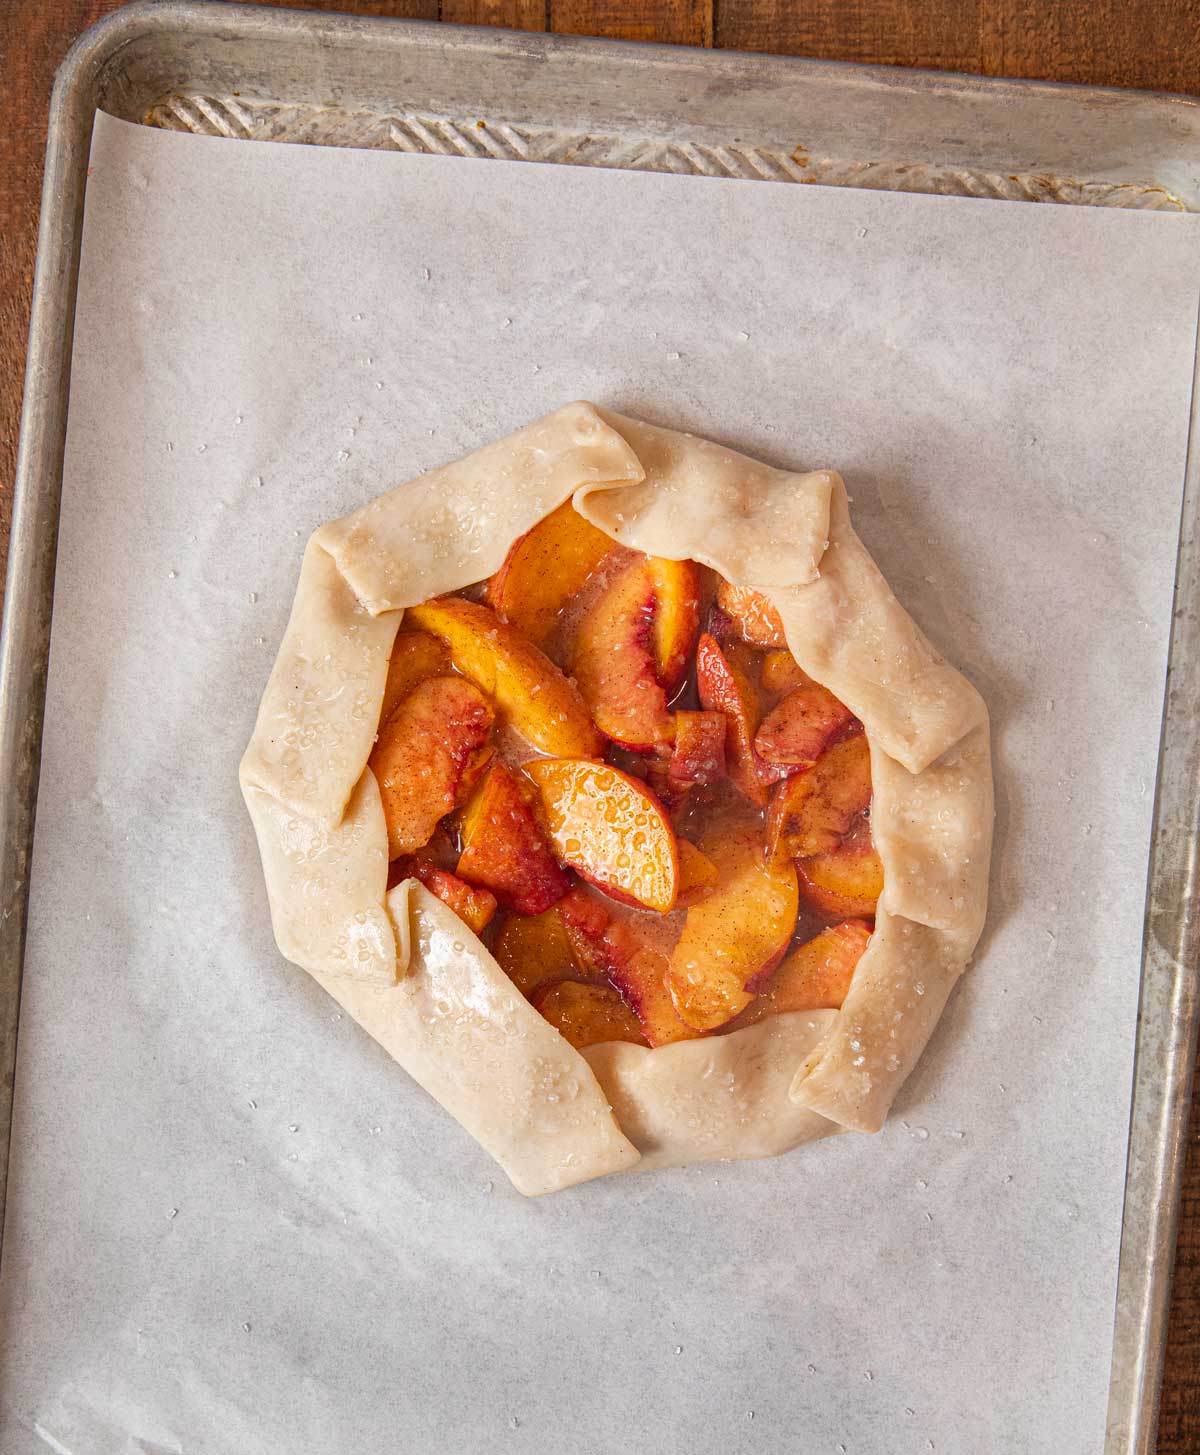 Rustic Peach Galette on baking sheet before baking